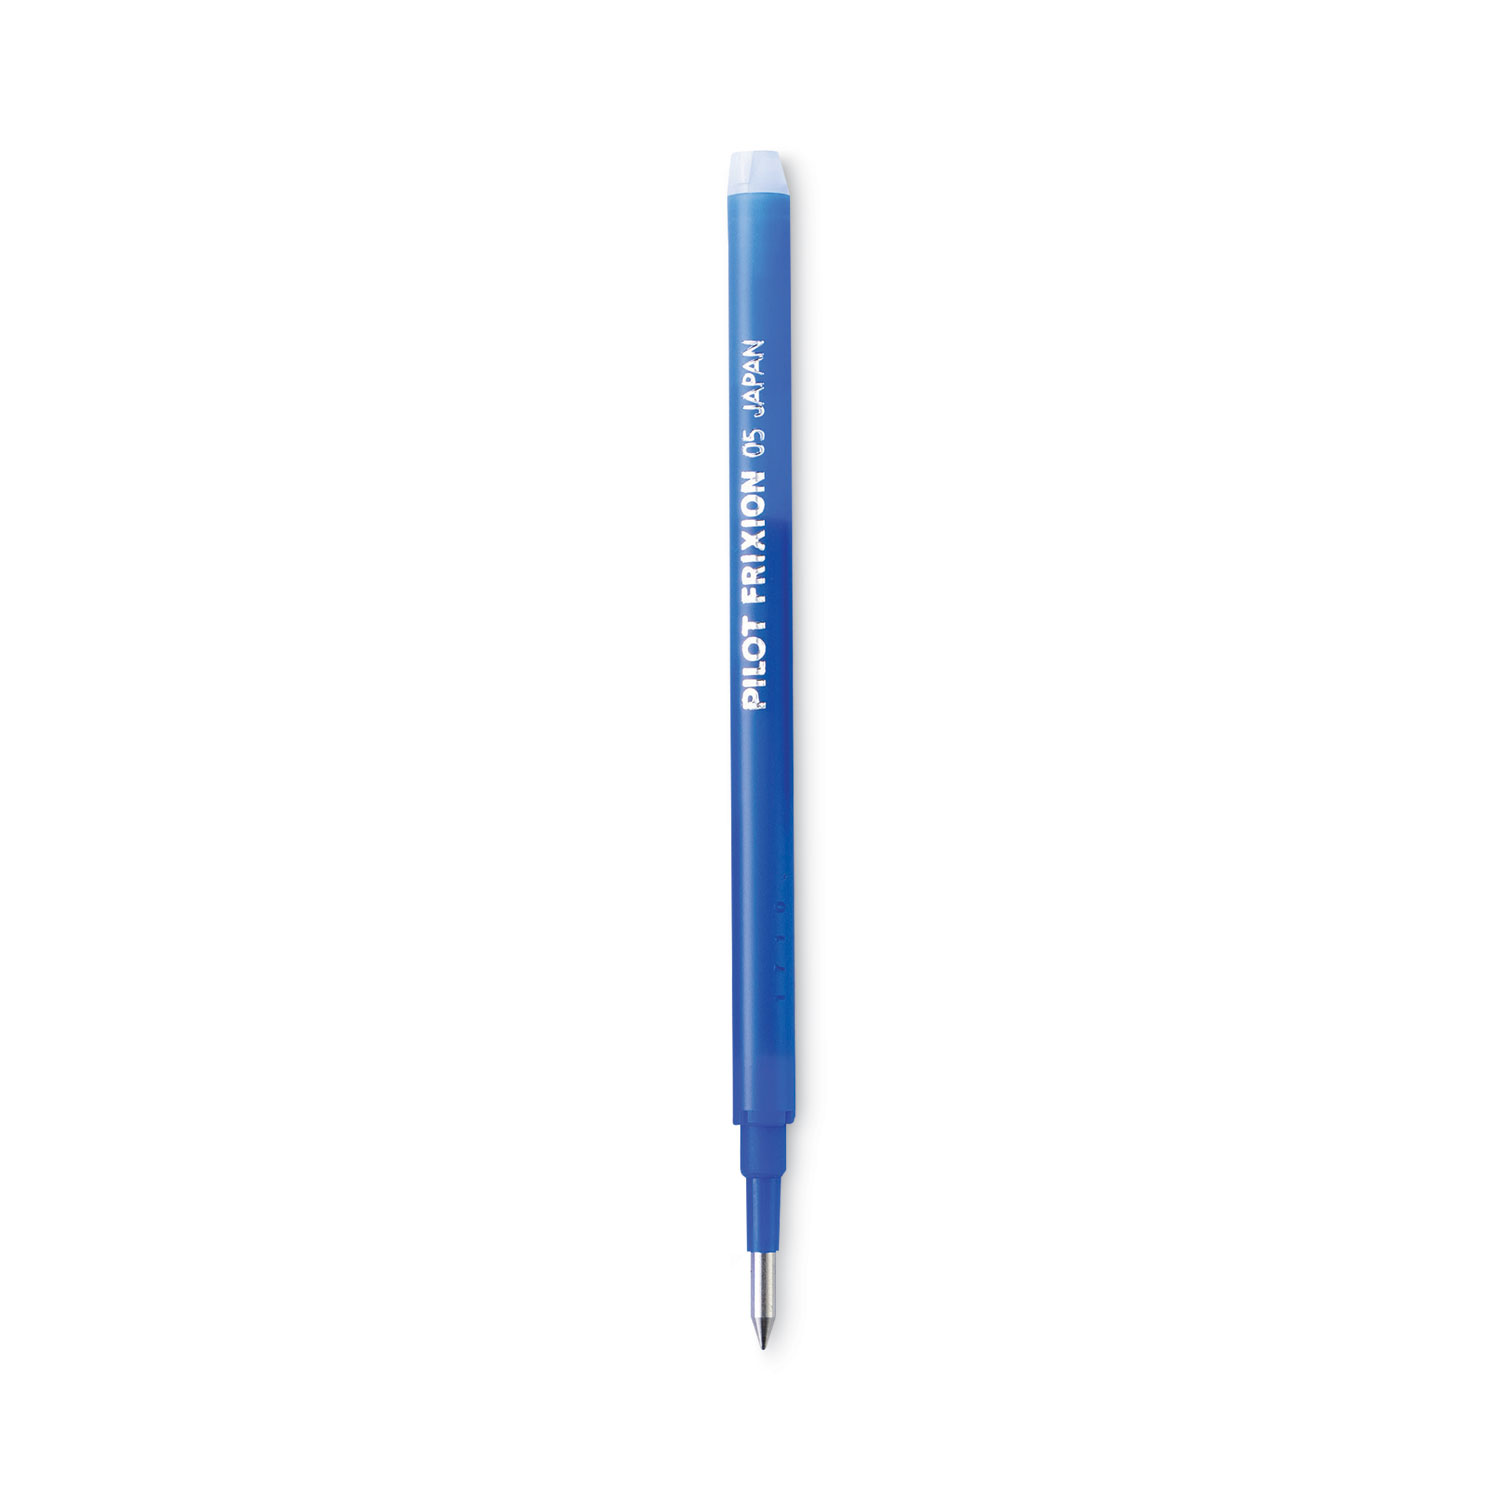 Frixtion Erasable Clicker Gel Pen For School Office Without Paper